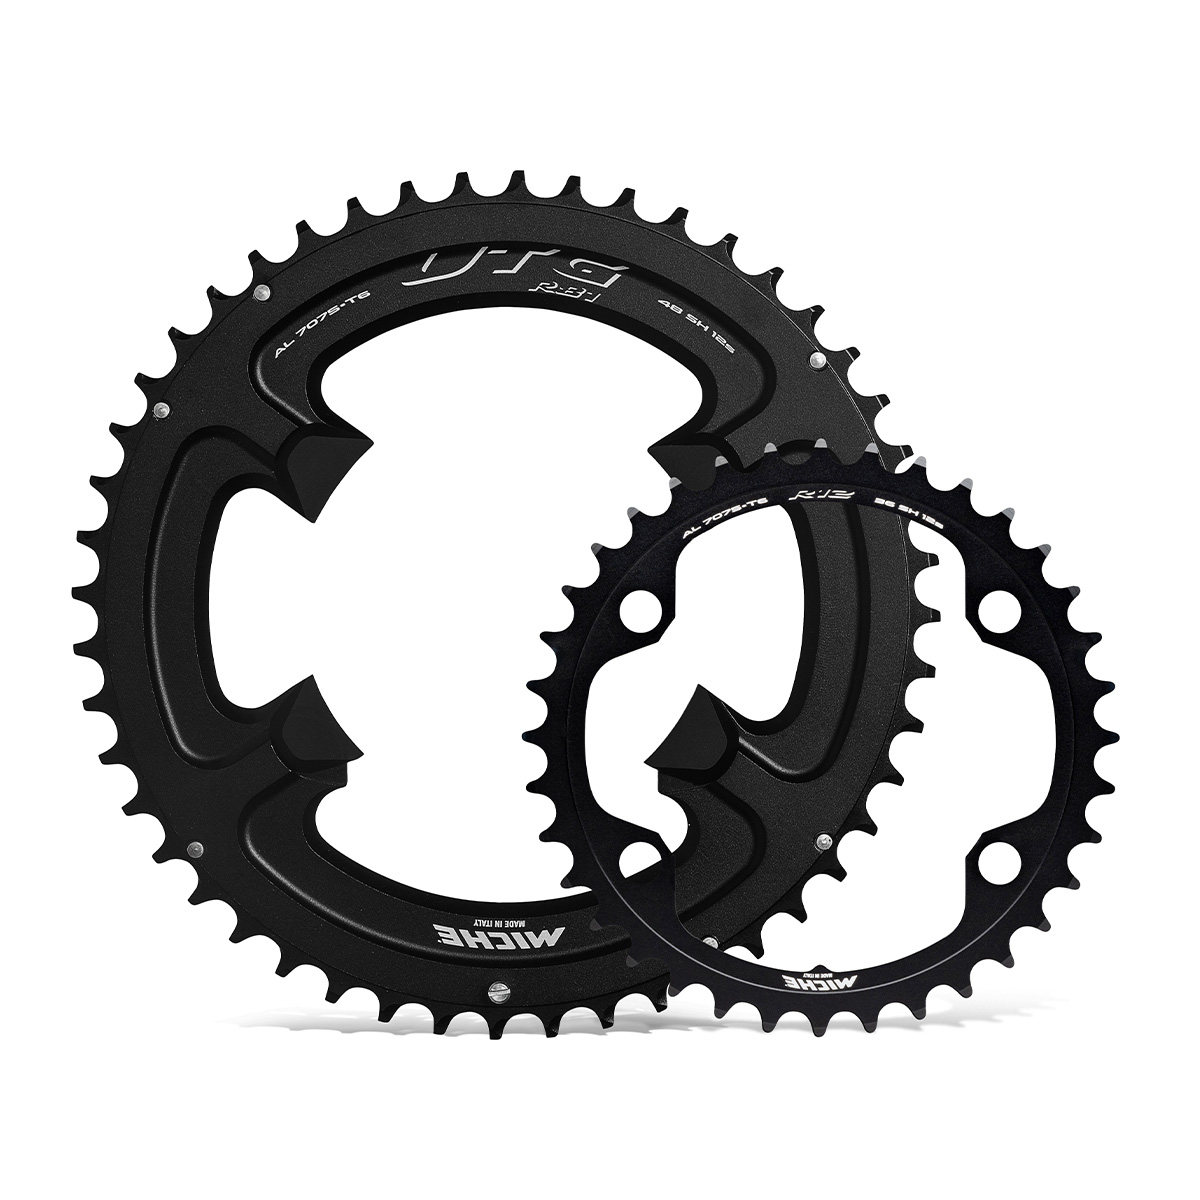 Miche Utg R81 Chainring 58T 12Sp Black With Bolts - CGR8LBSH58B00